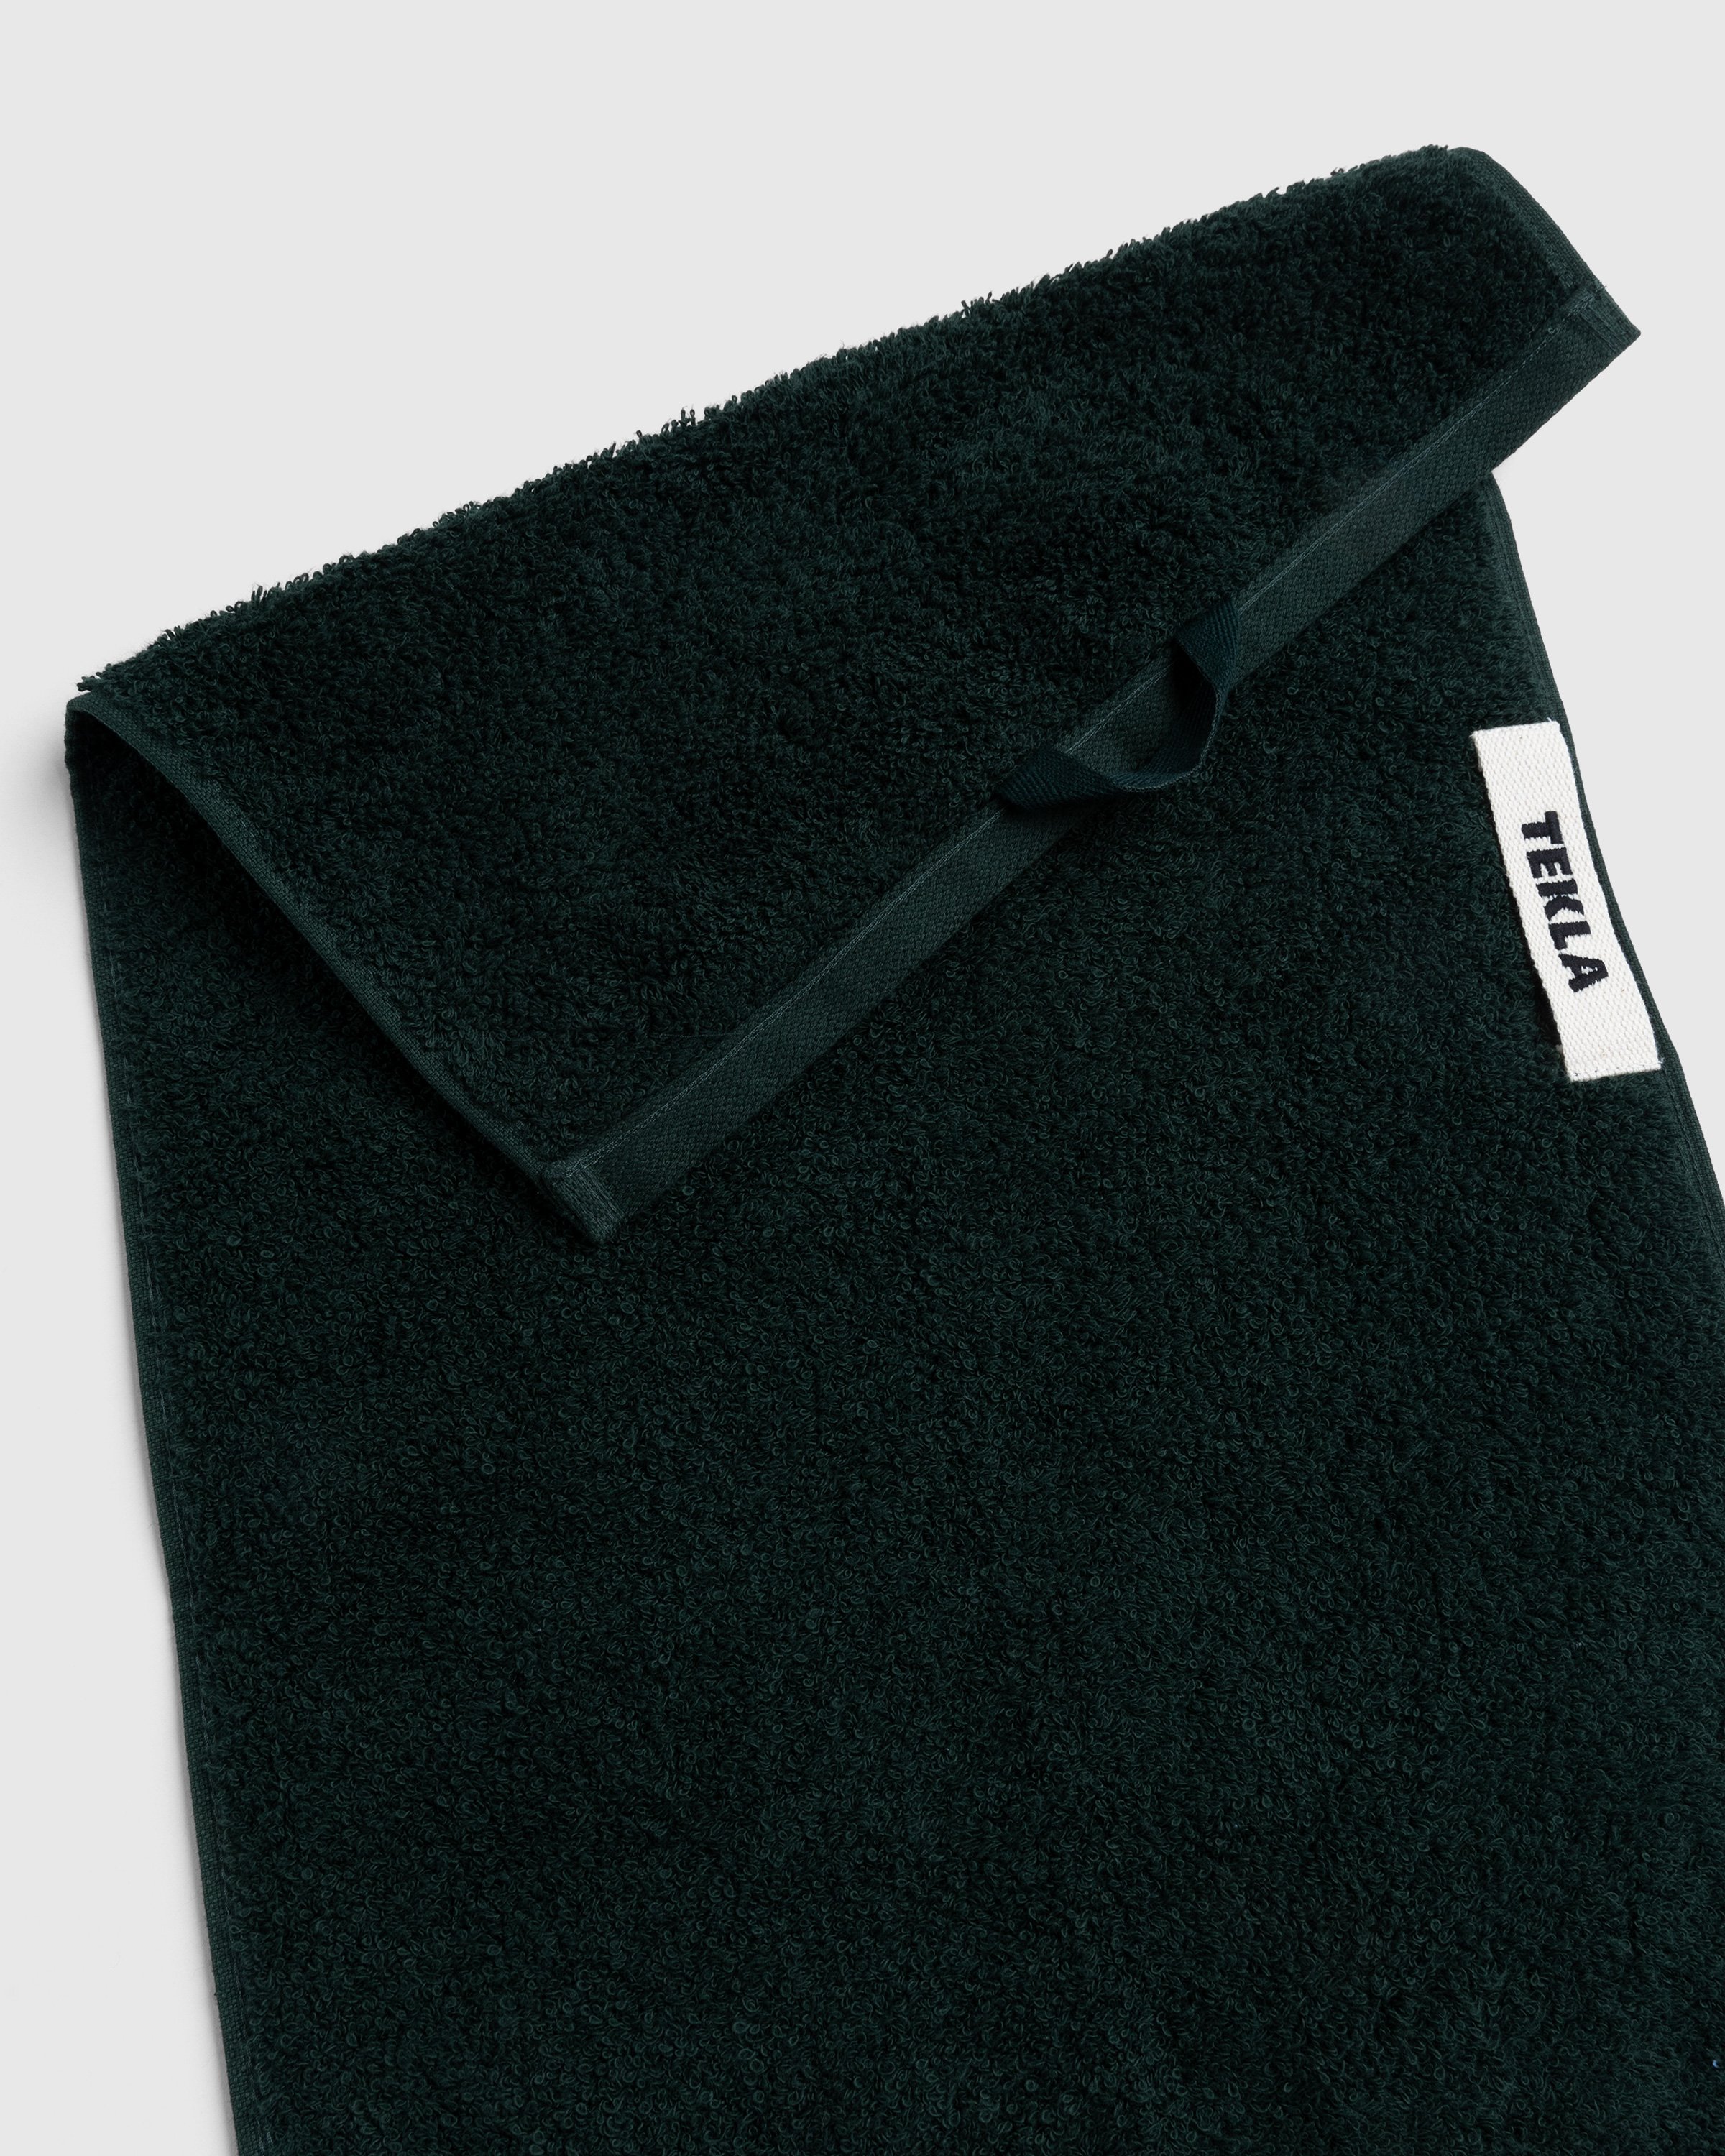 Tekla - Hand Towel Forest Green - Lifestyle - Green - Image 3